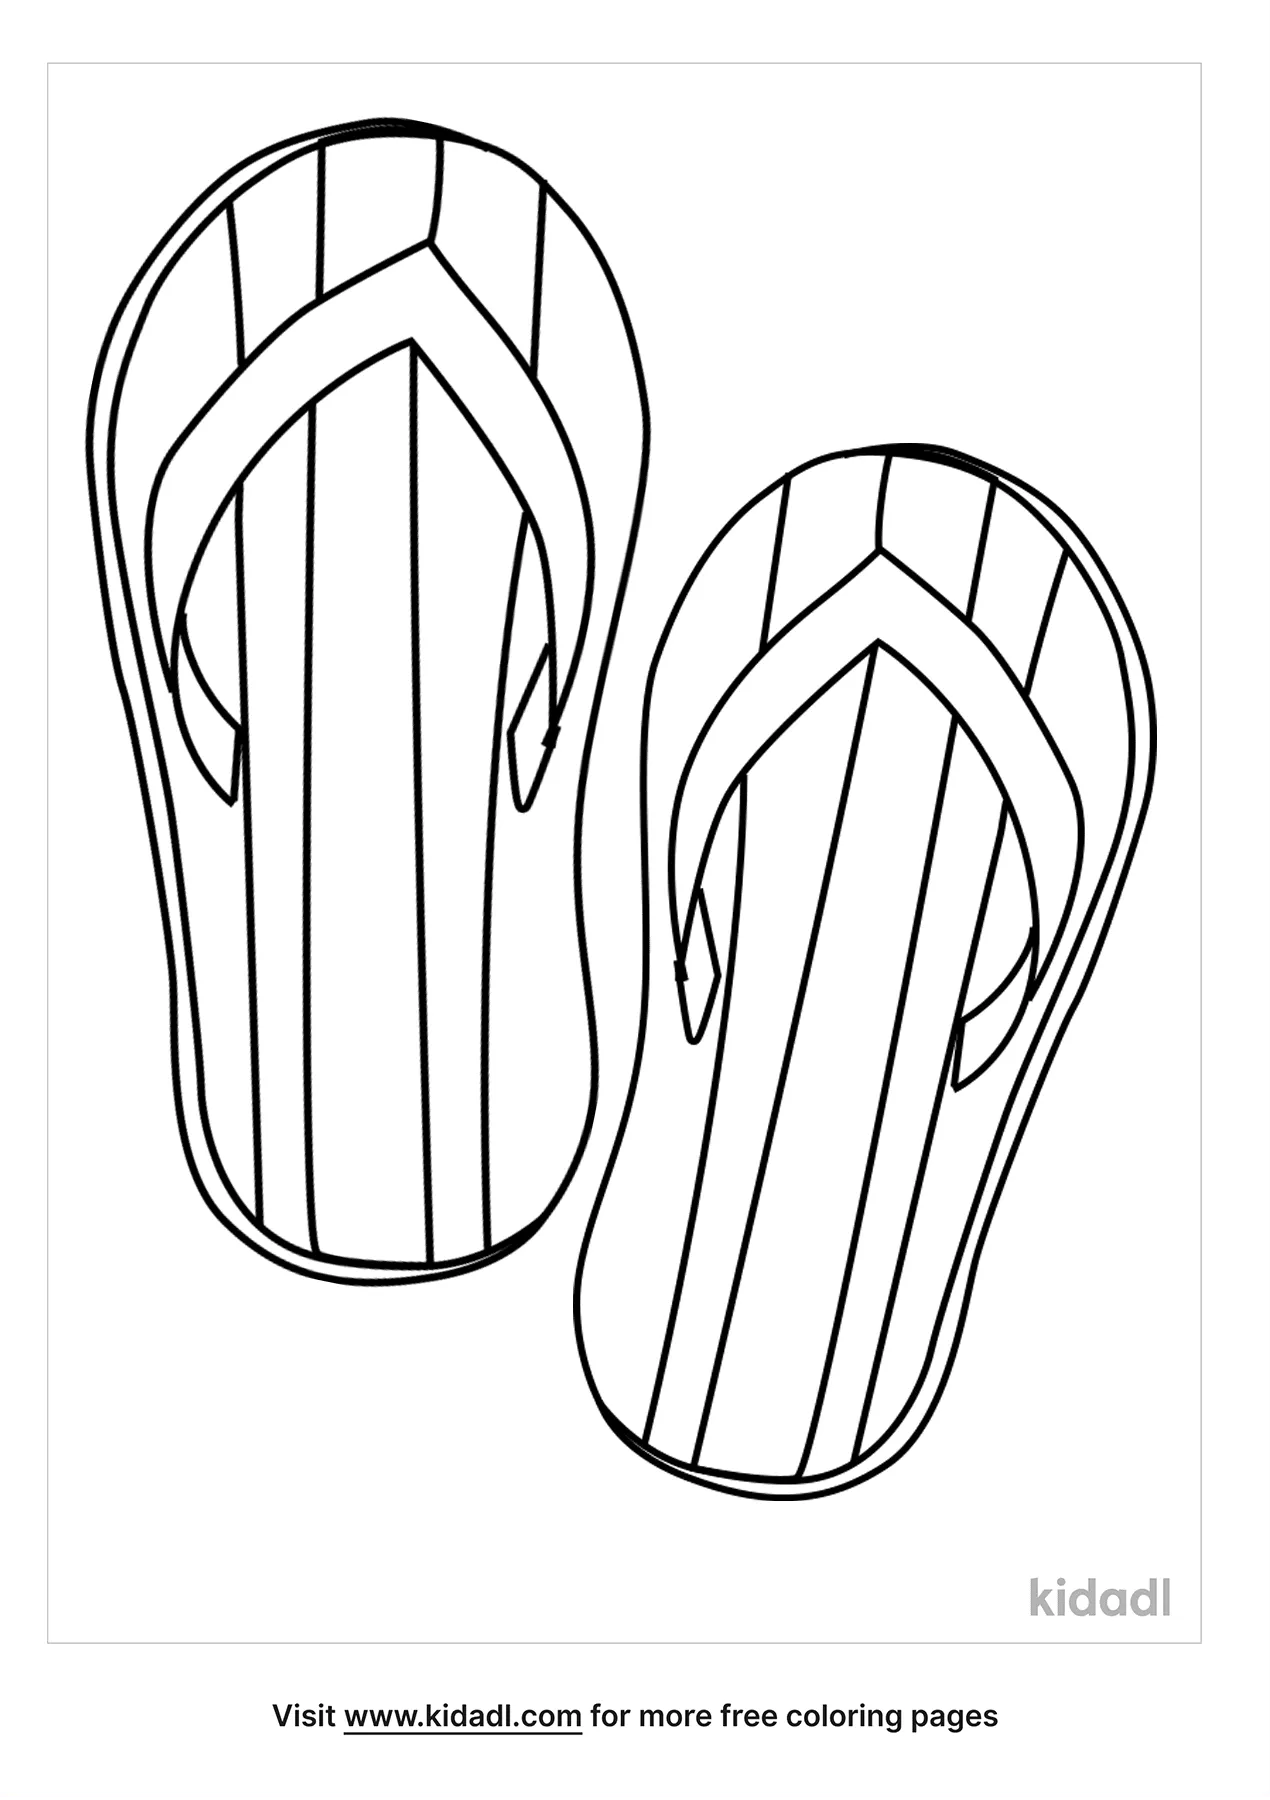 Flip Flop Coloring Pages Free Printable - FREE PRINTABLE TEMPLATES